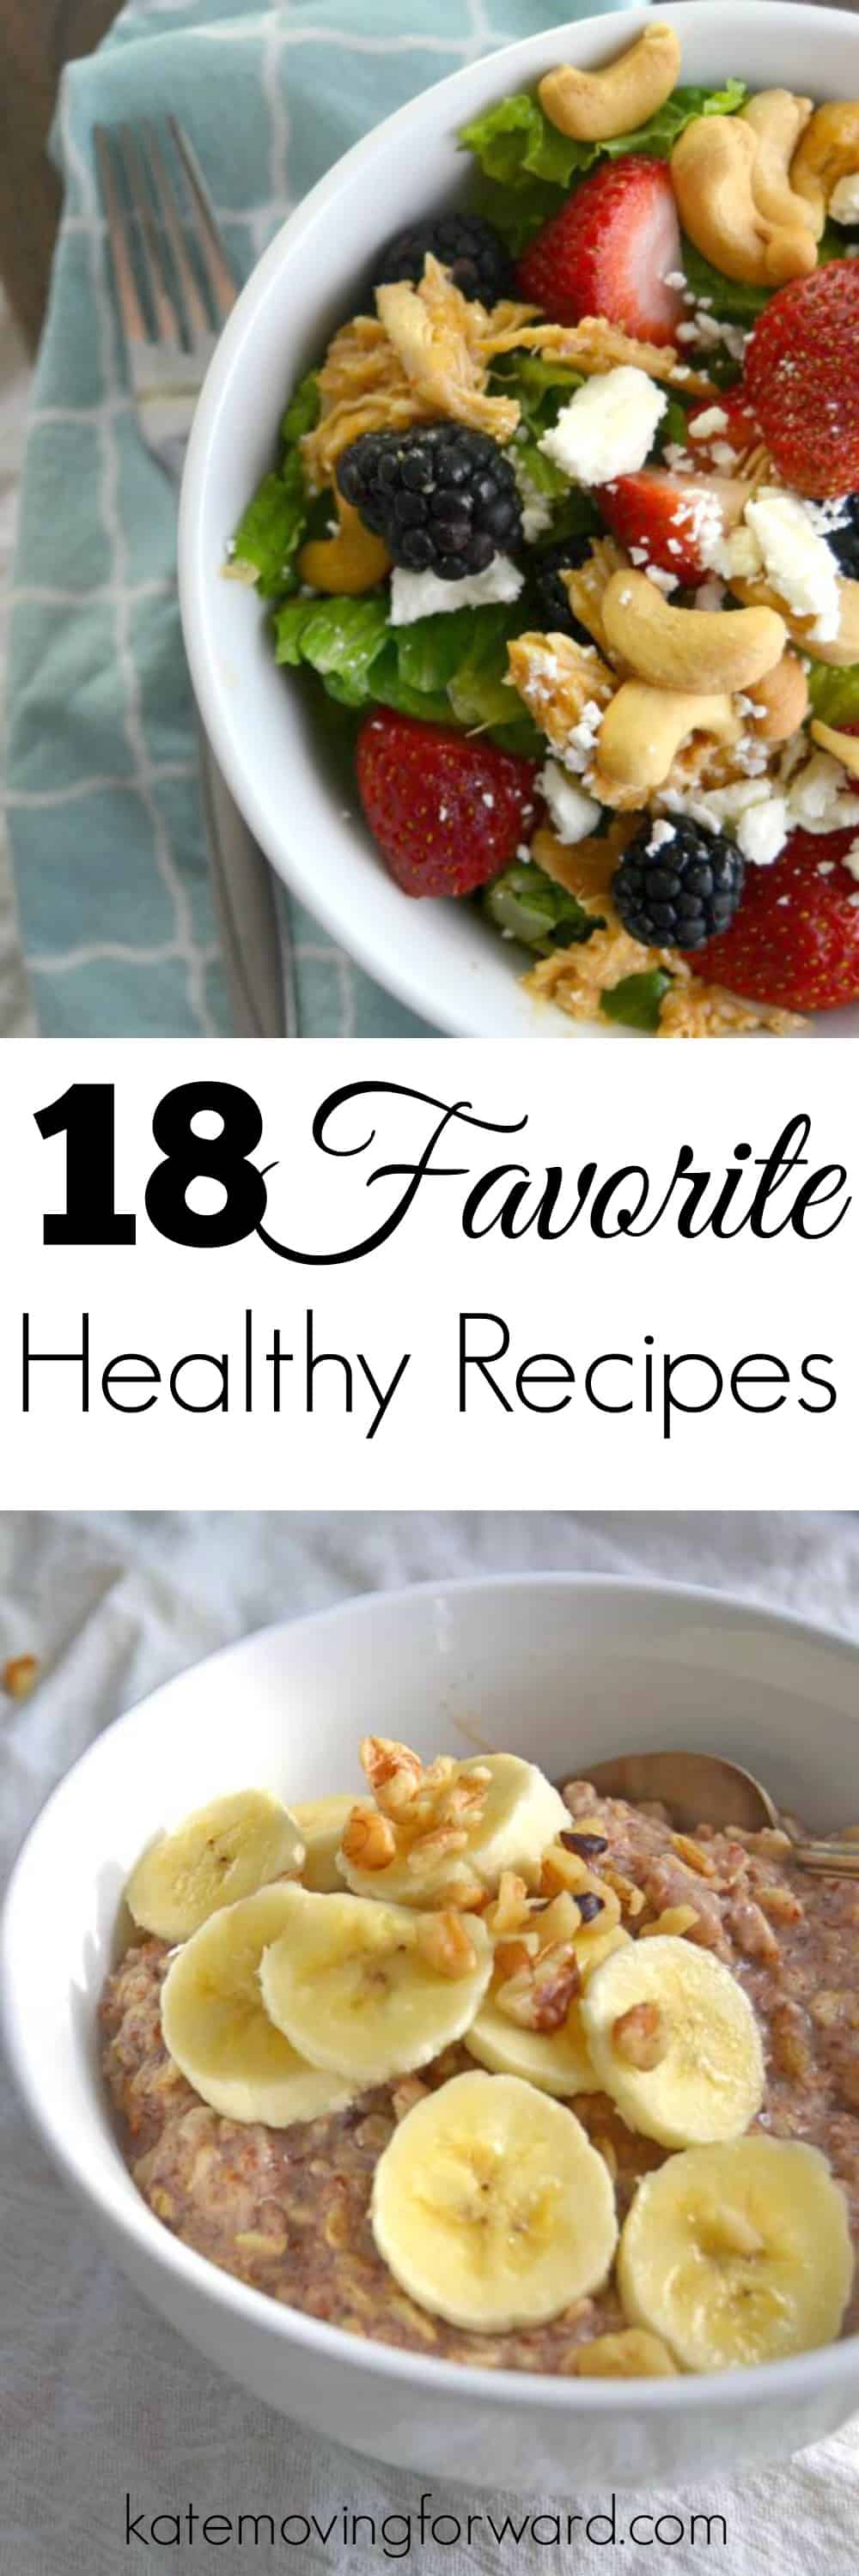 18 Favorite Healthy Recipes - Use these healthy breakfast, lunches, dinners, and snacks to kick start your clean eating this year! 